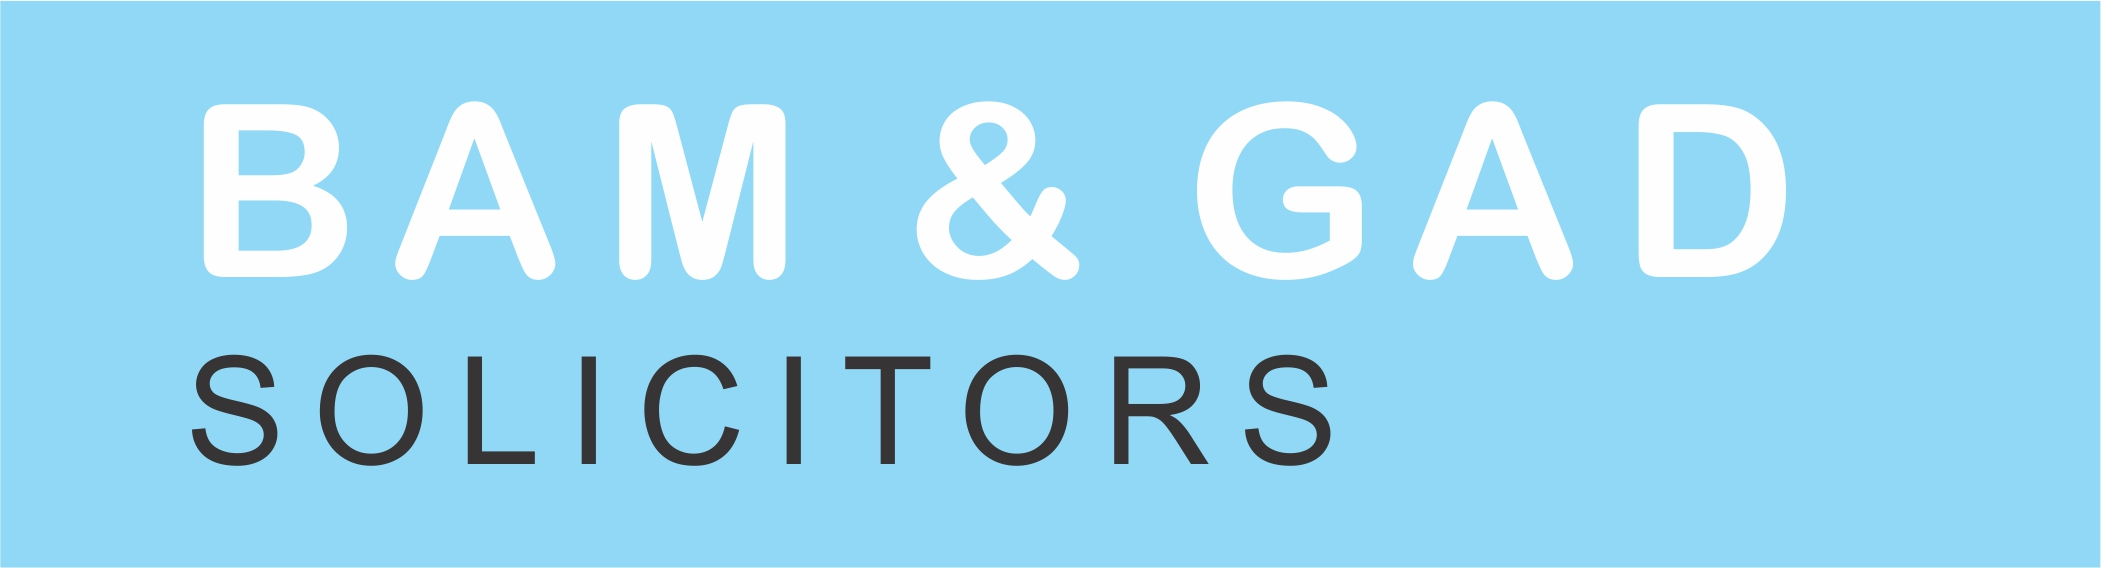 BAM and GAD SOLICITORS Logo